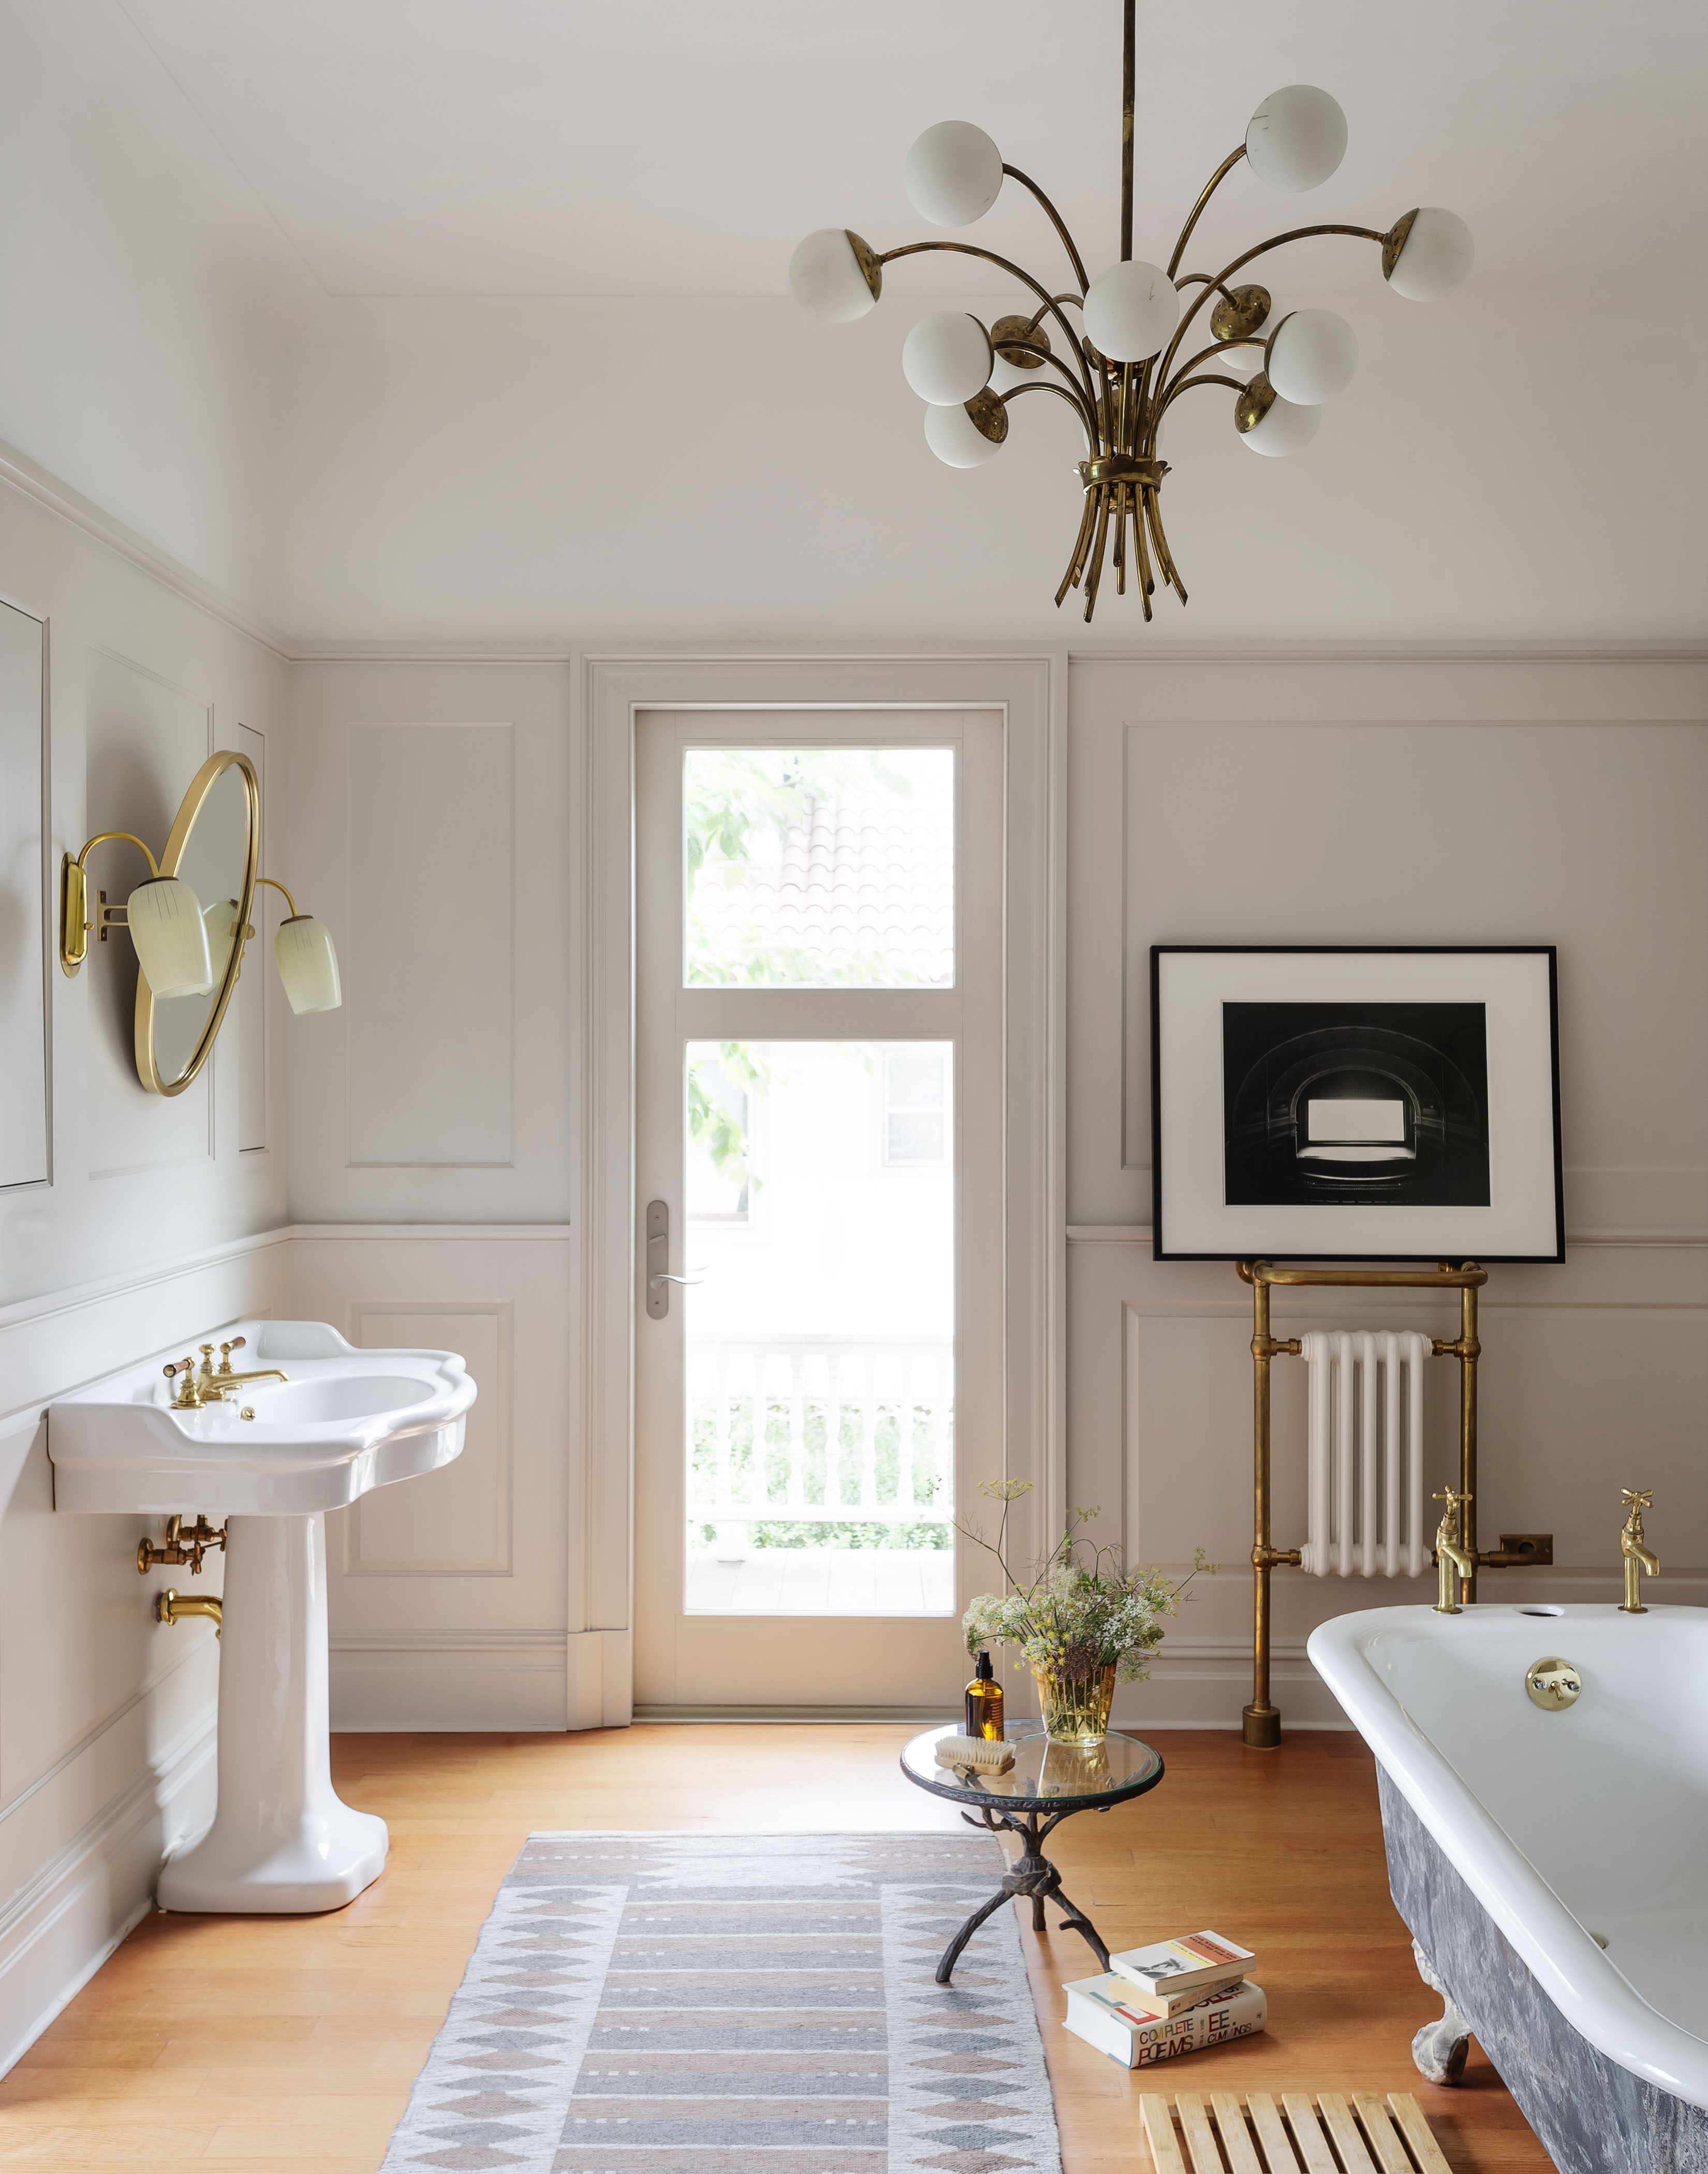 the vintage feeling bath in the prospect park renovation. photograph by matthew 9